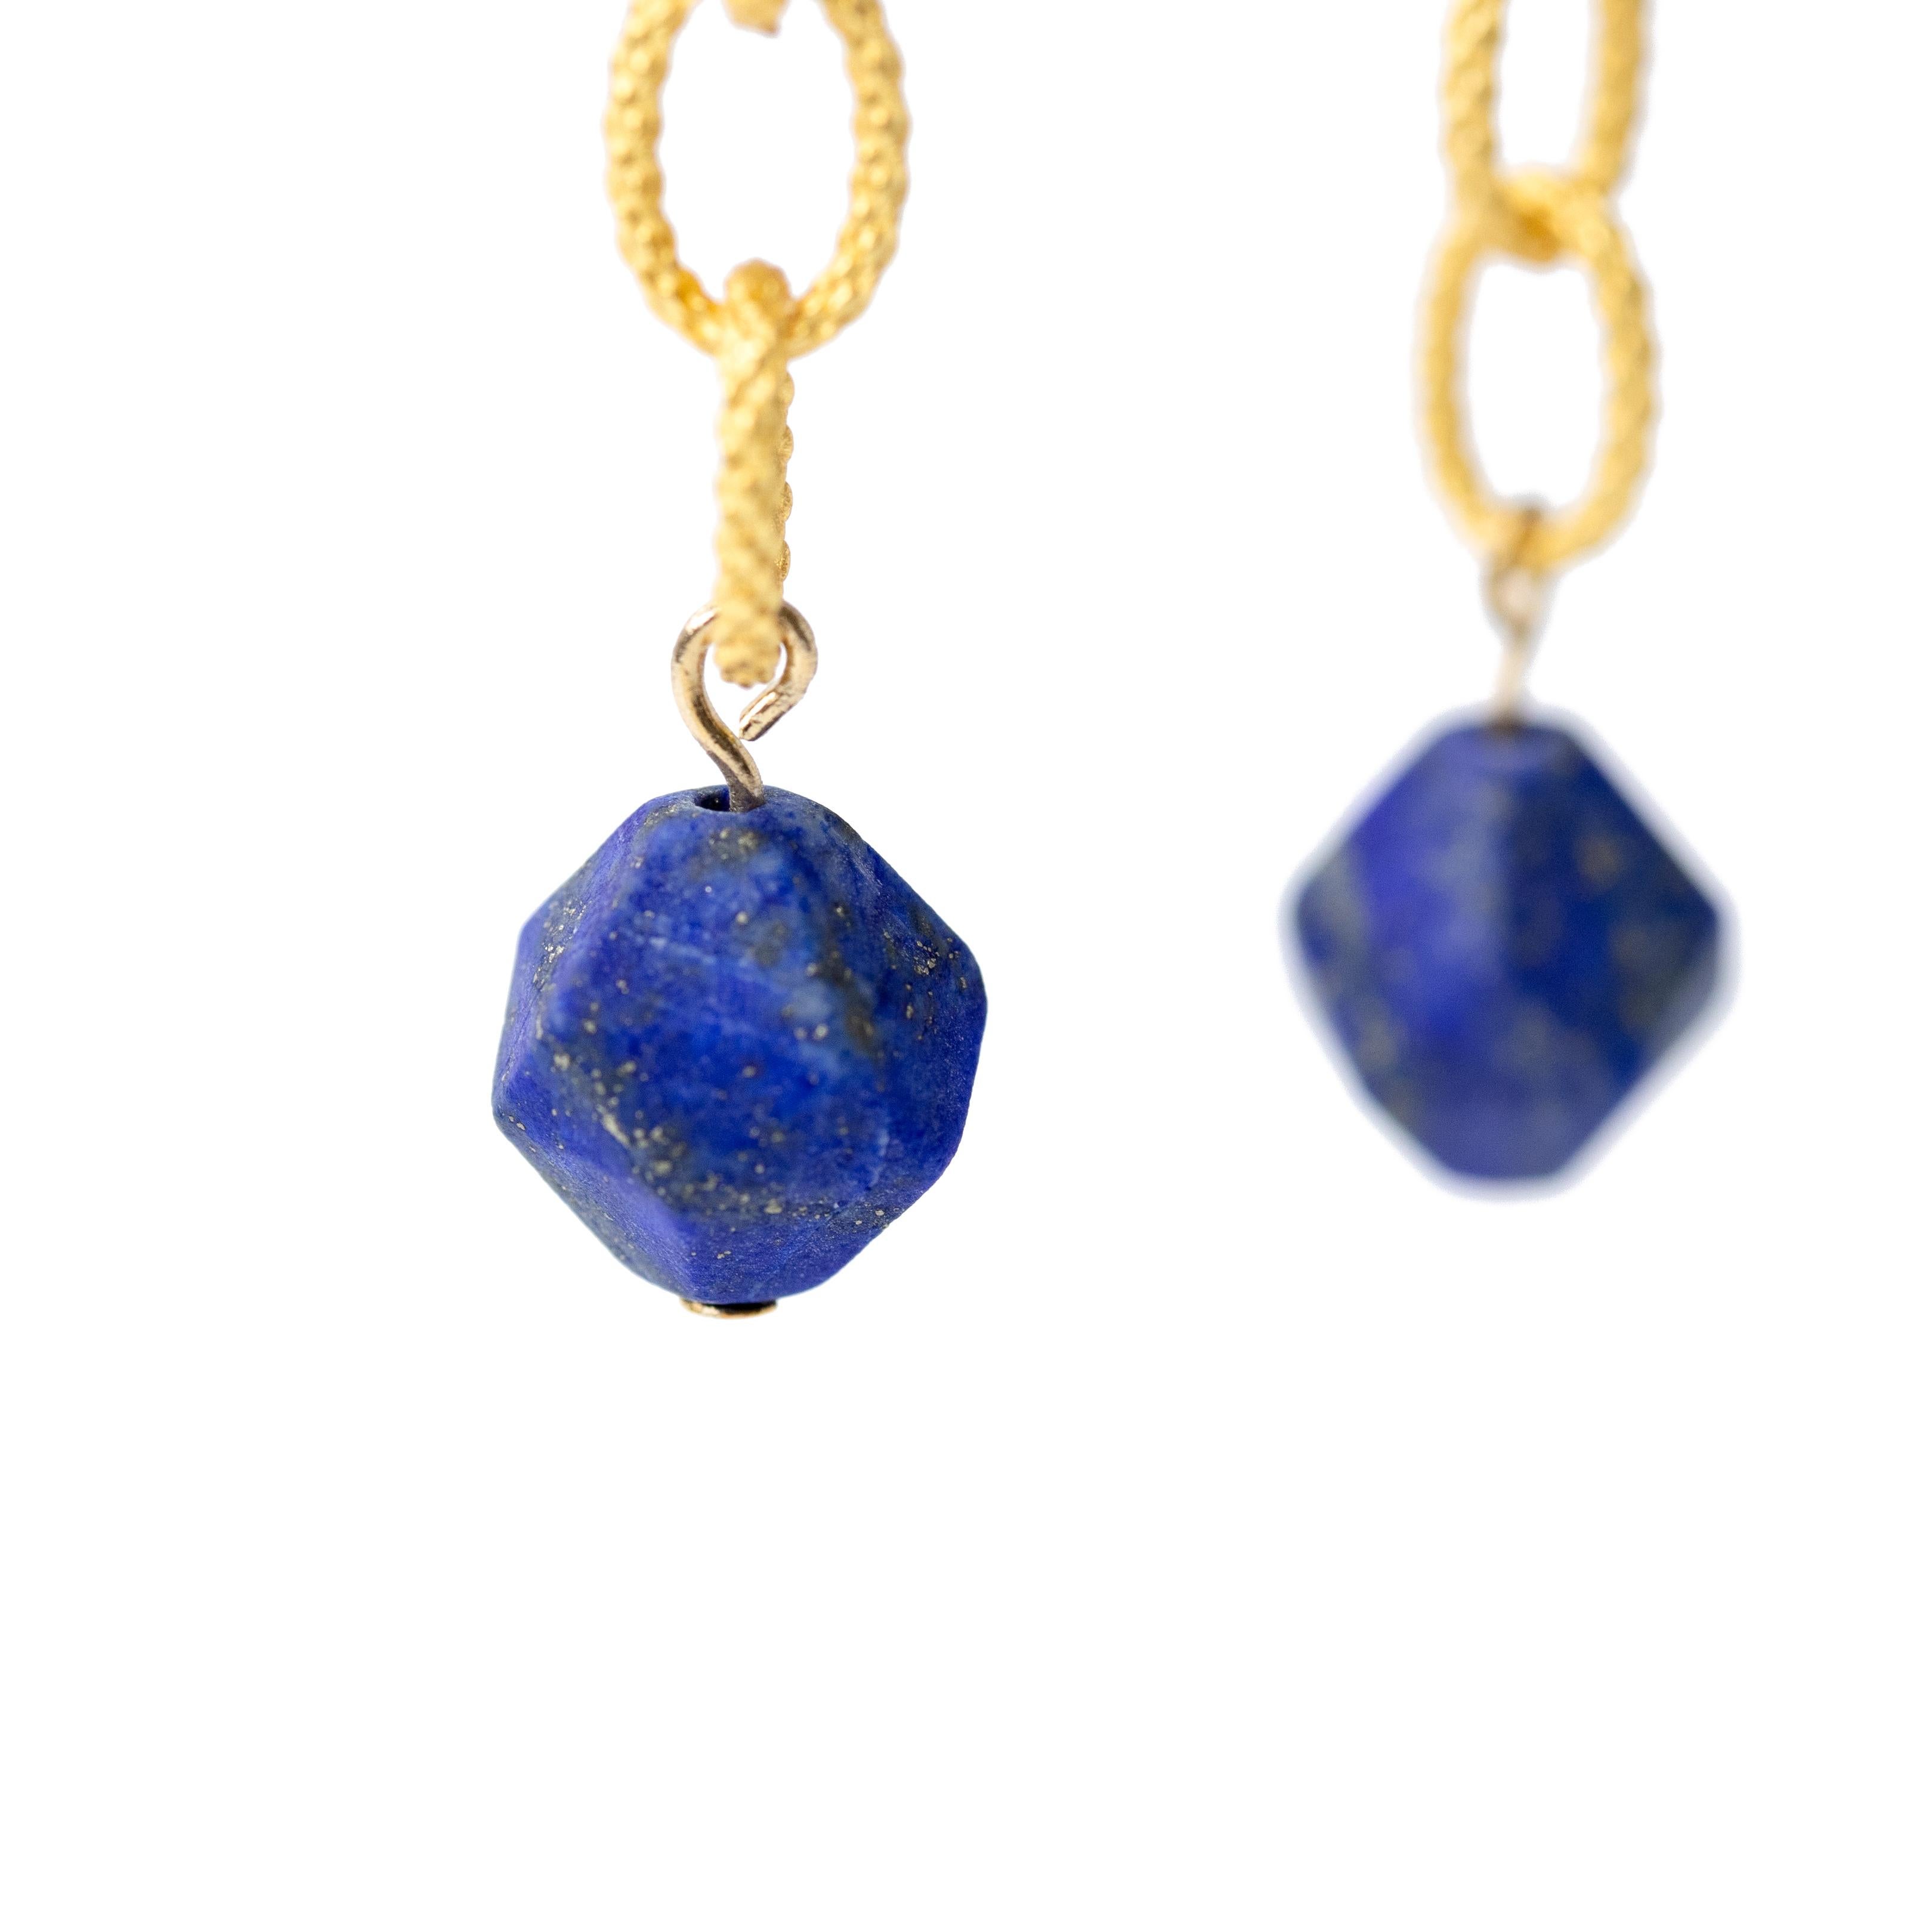 These earrings are handcrafted from Lapis Lazuli and detailed gold chain. They give you the perfect blend of subtle edginess and elegance to stand out effortlessly. 

2.5